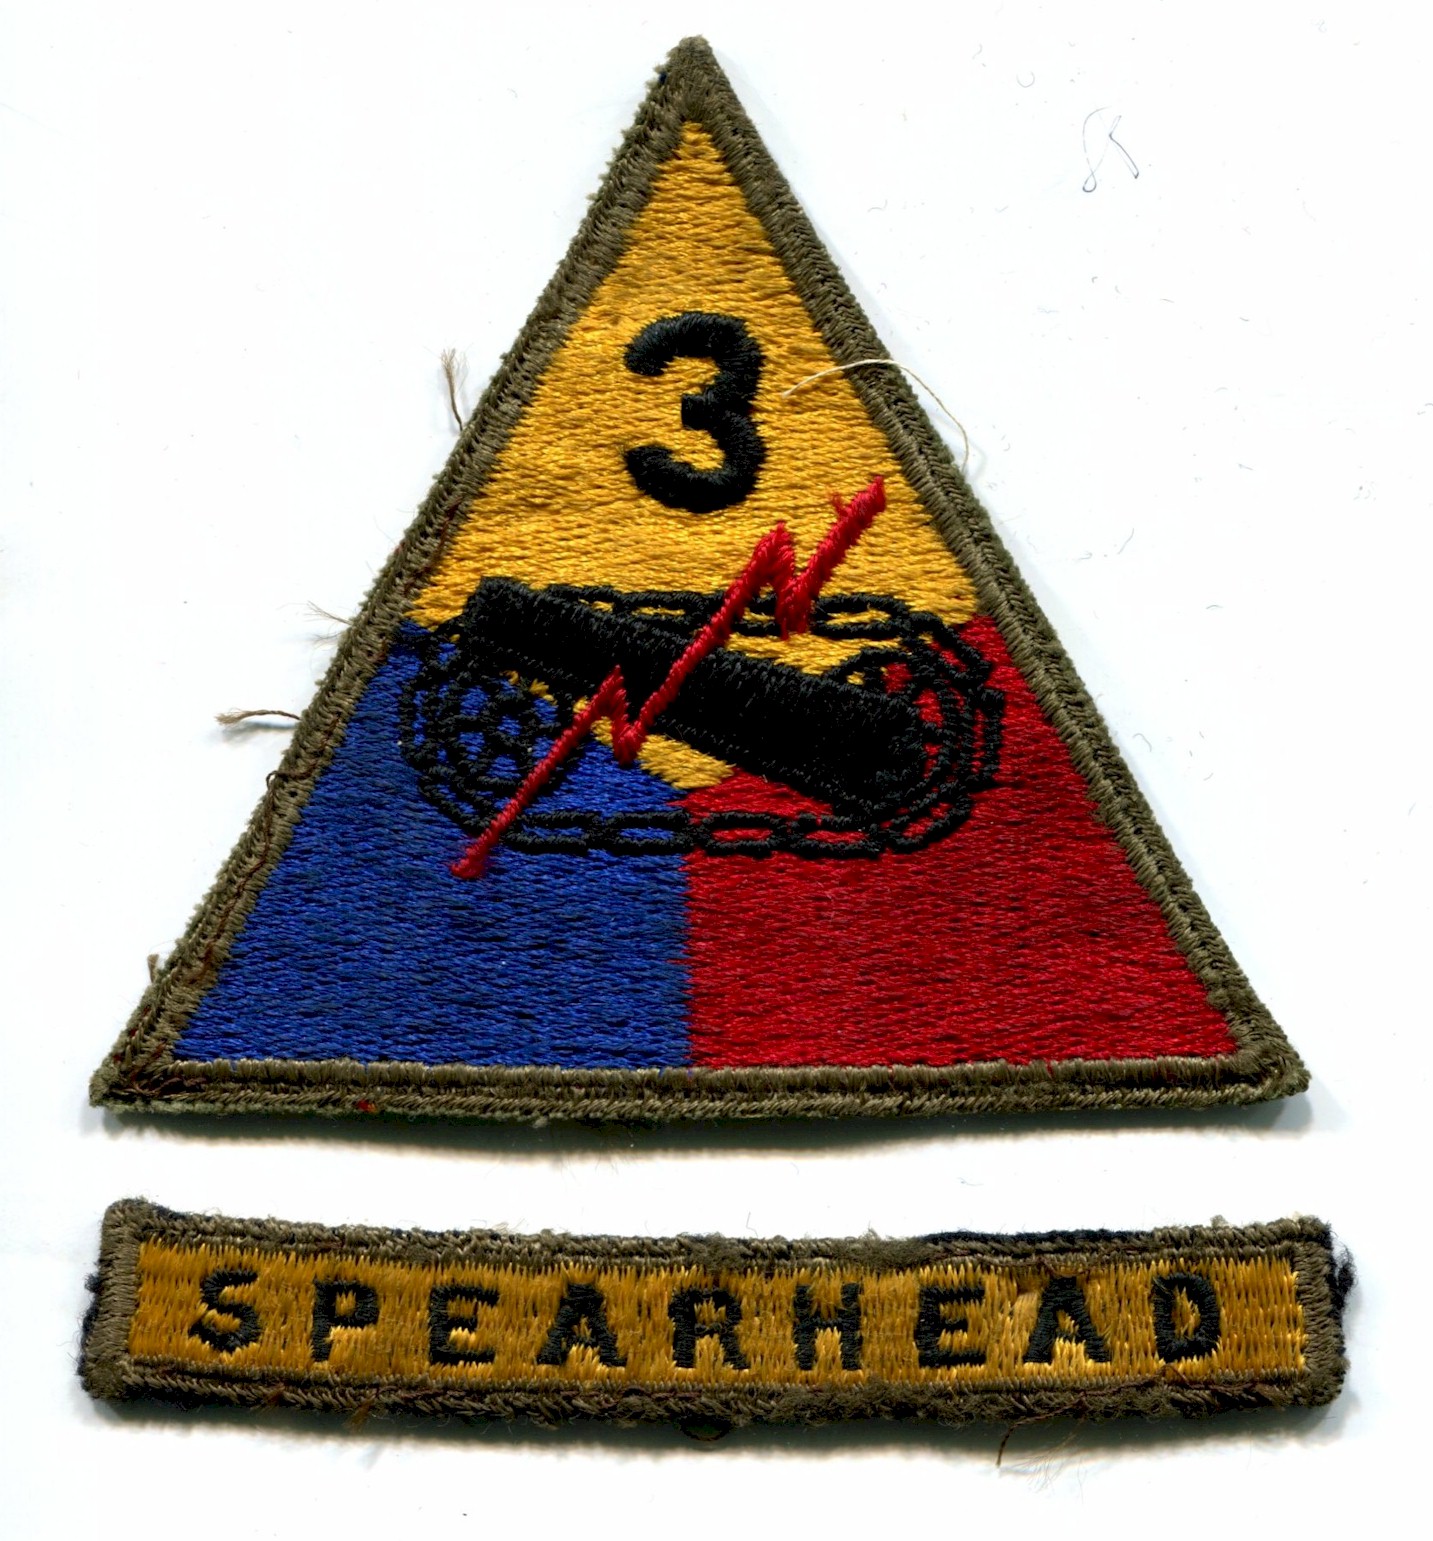 ORIGINAL GREEN BACK 3RD ARMORED DIVISION PATCH WITH SPEARHEAD TAB